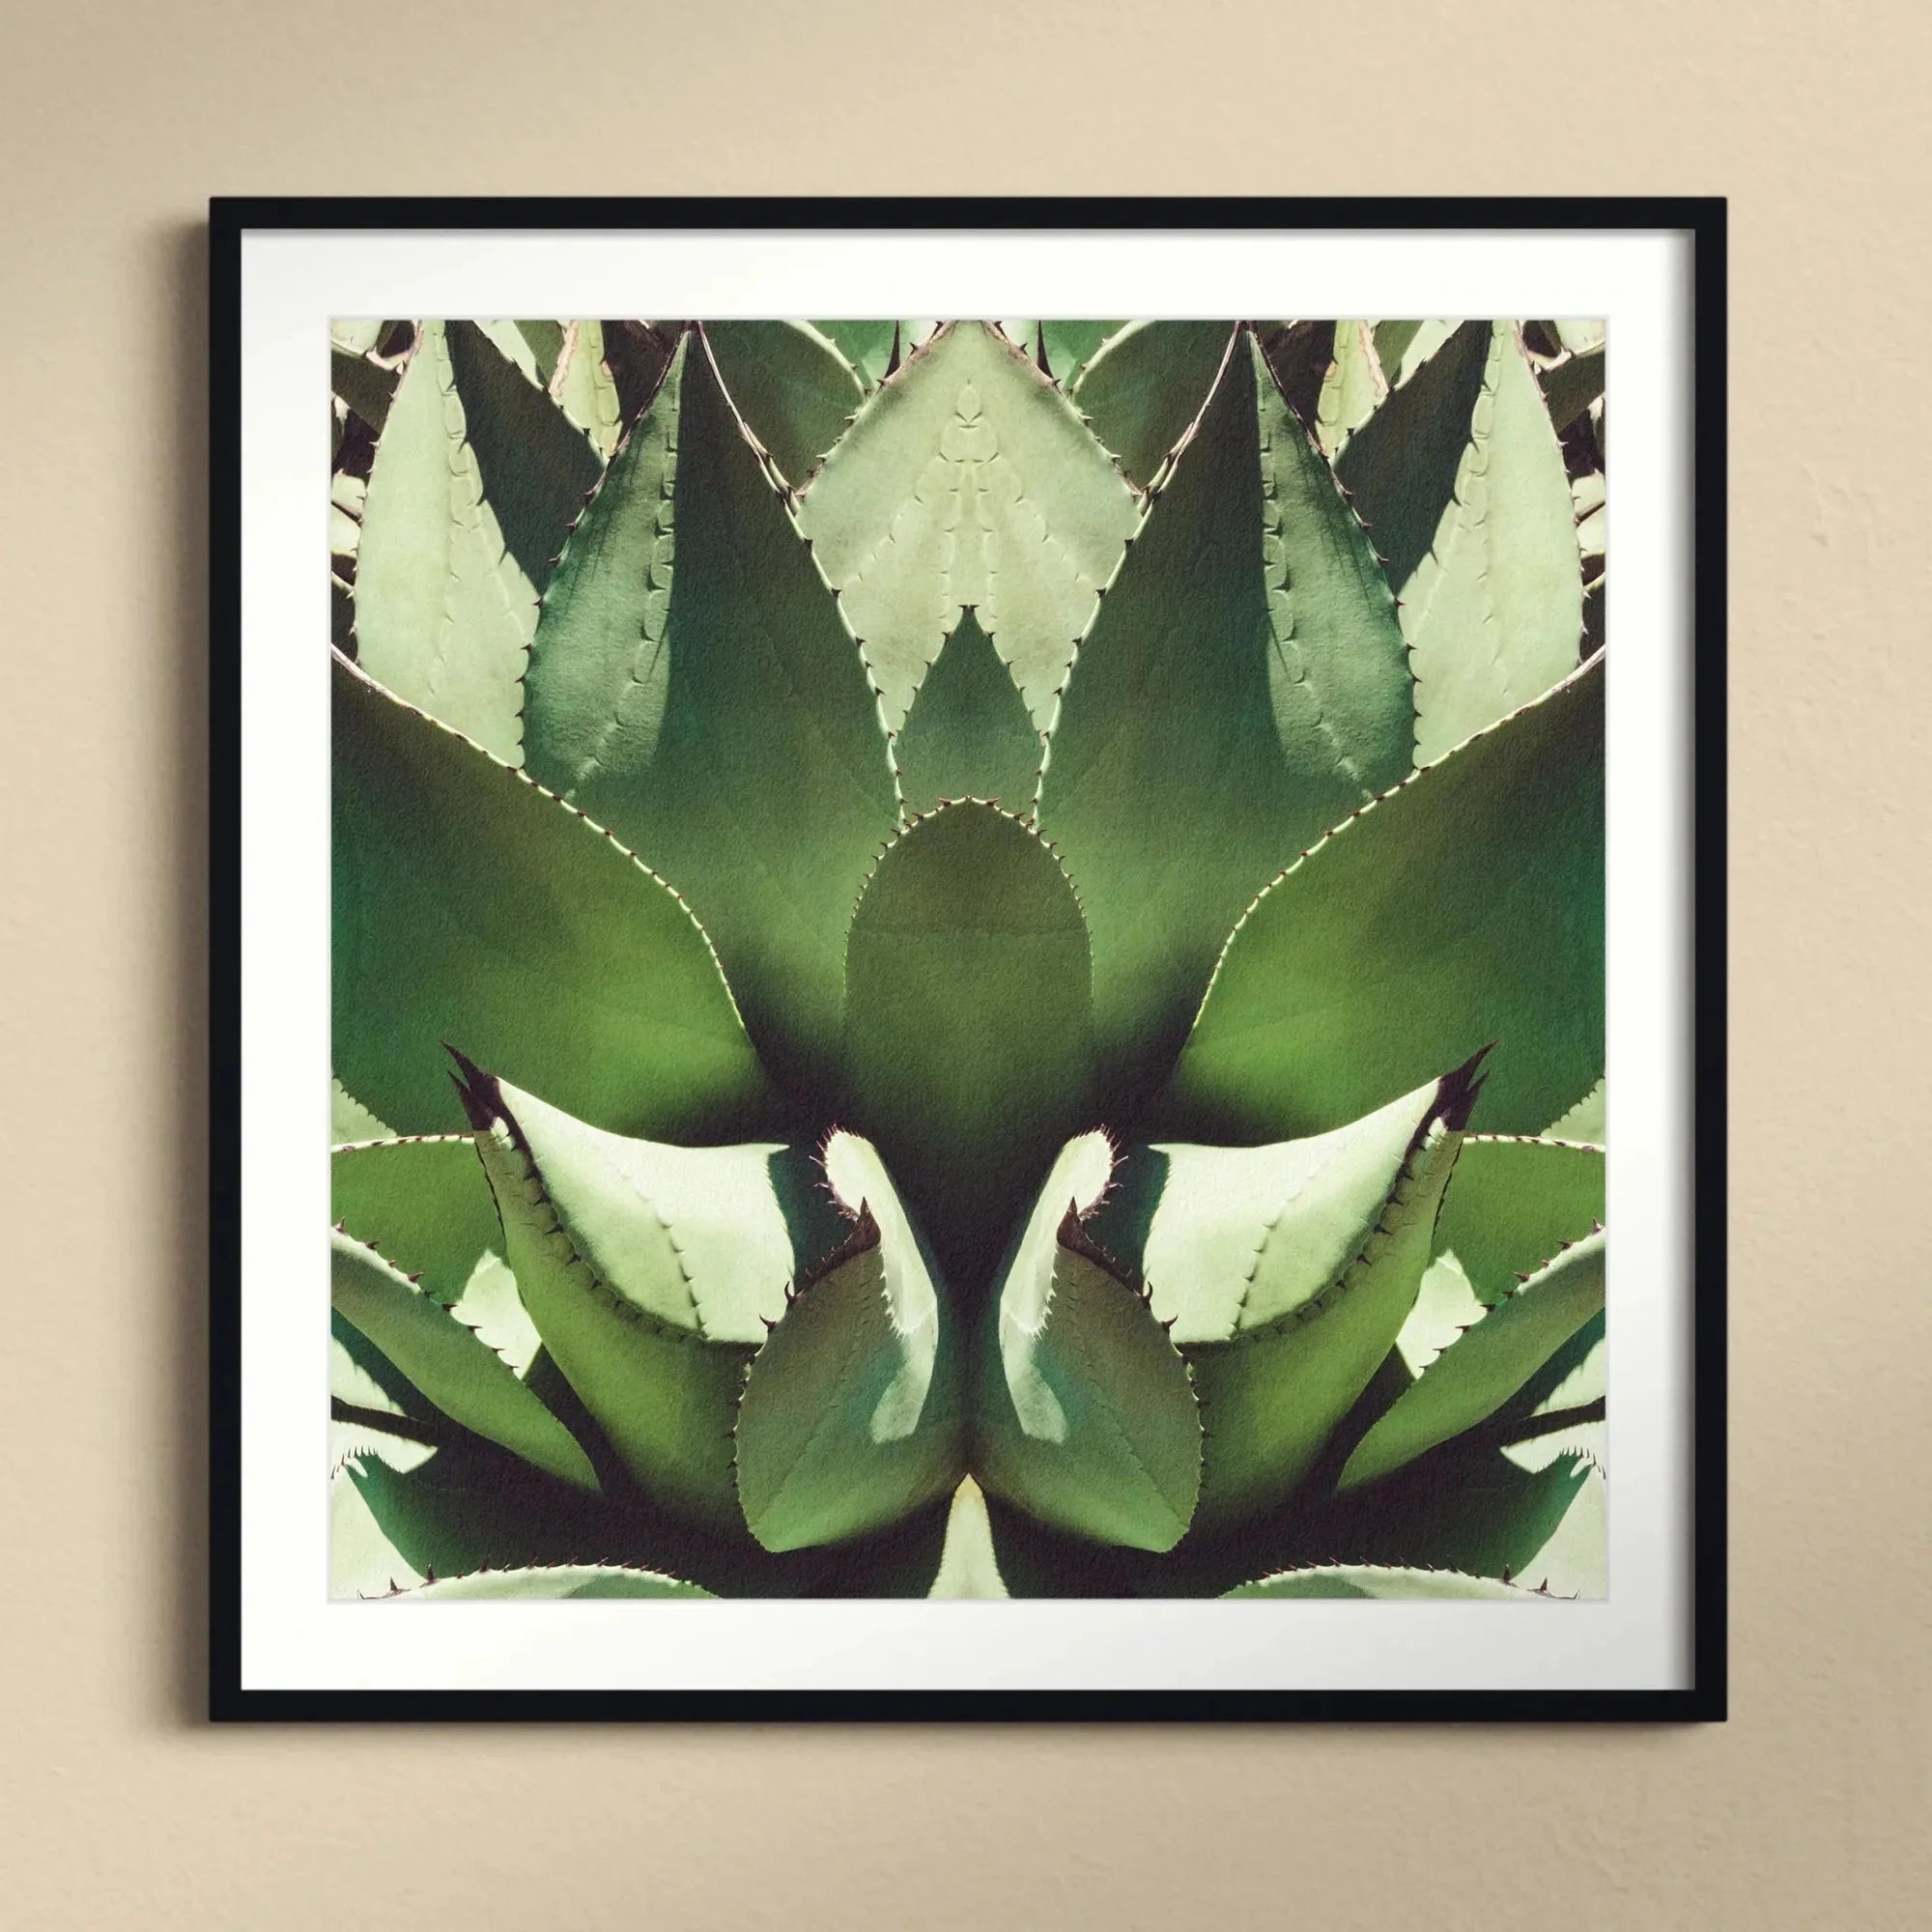 Open Wide Framed & Mounted Print - Posters Prints & Visual Artwork - Aesthetic Art